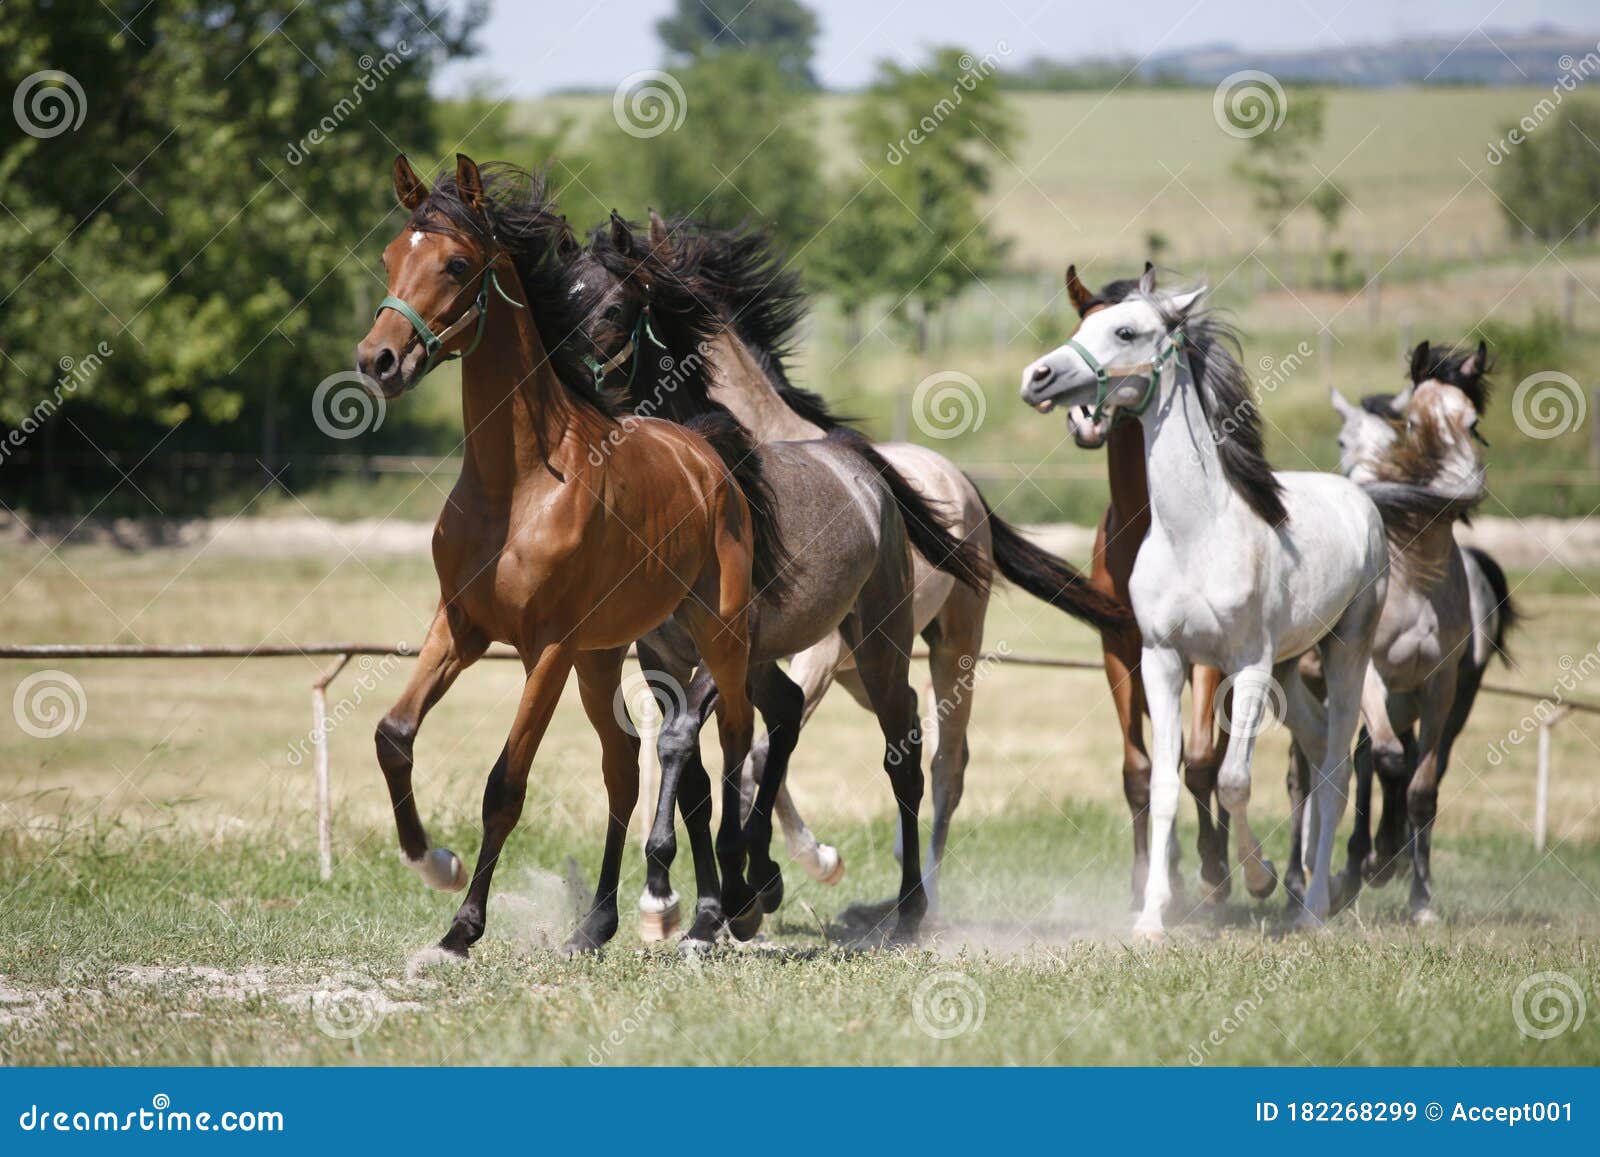 Panoramic View of Herd of Horses while Running Home on Rural Animal Farm  Stock Image - Image of breed, barn: 182268299